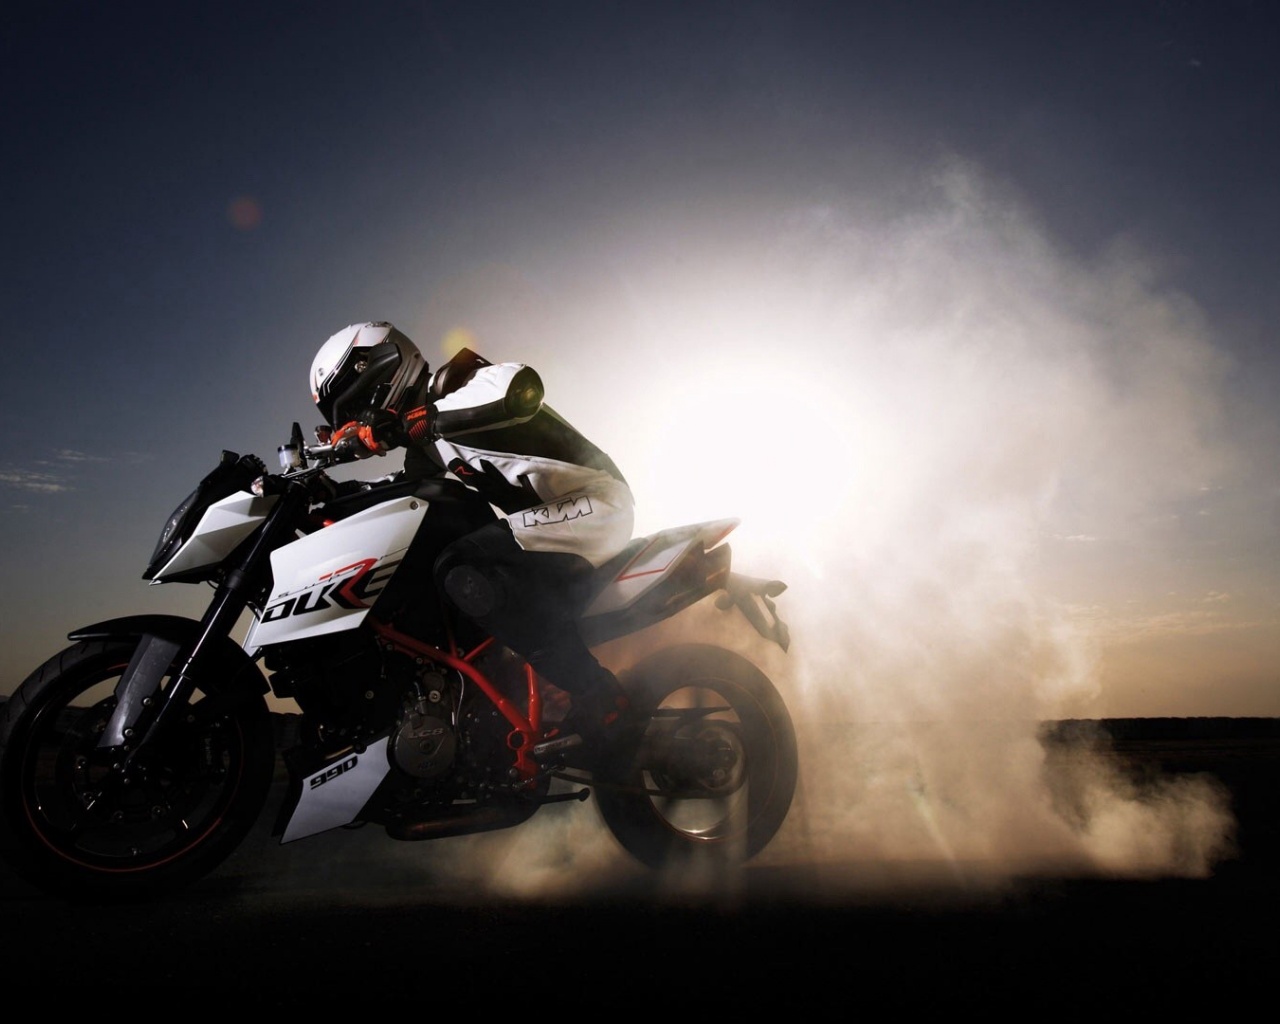 motorbike pictures and wallpapers,land vehicle,vehicle,motorcycle,motorcycling,superbike racing